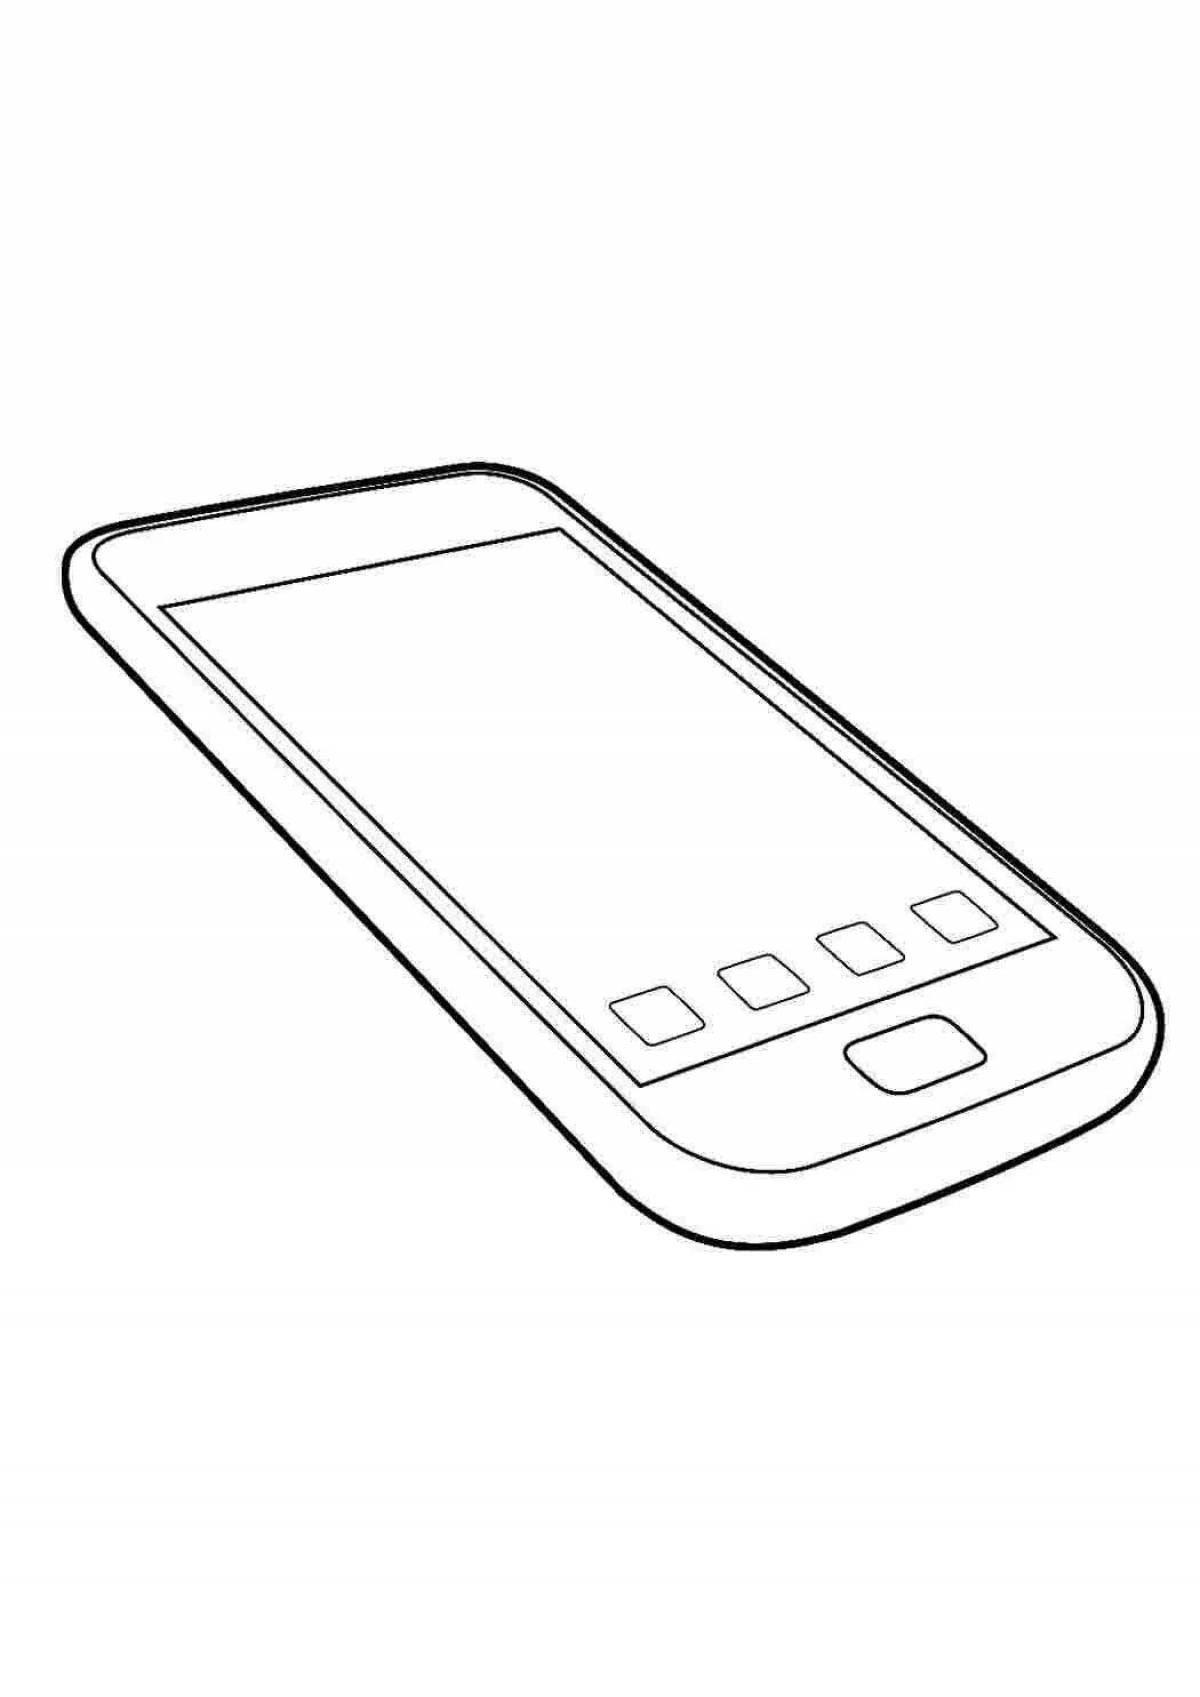 Samsung mystery coloring book